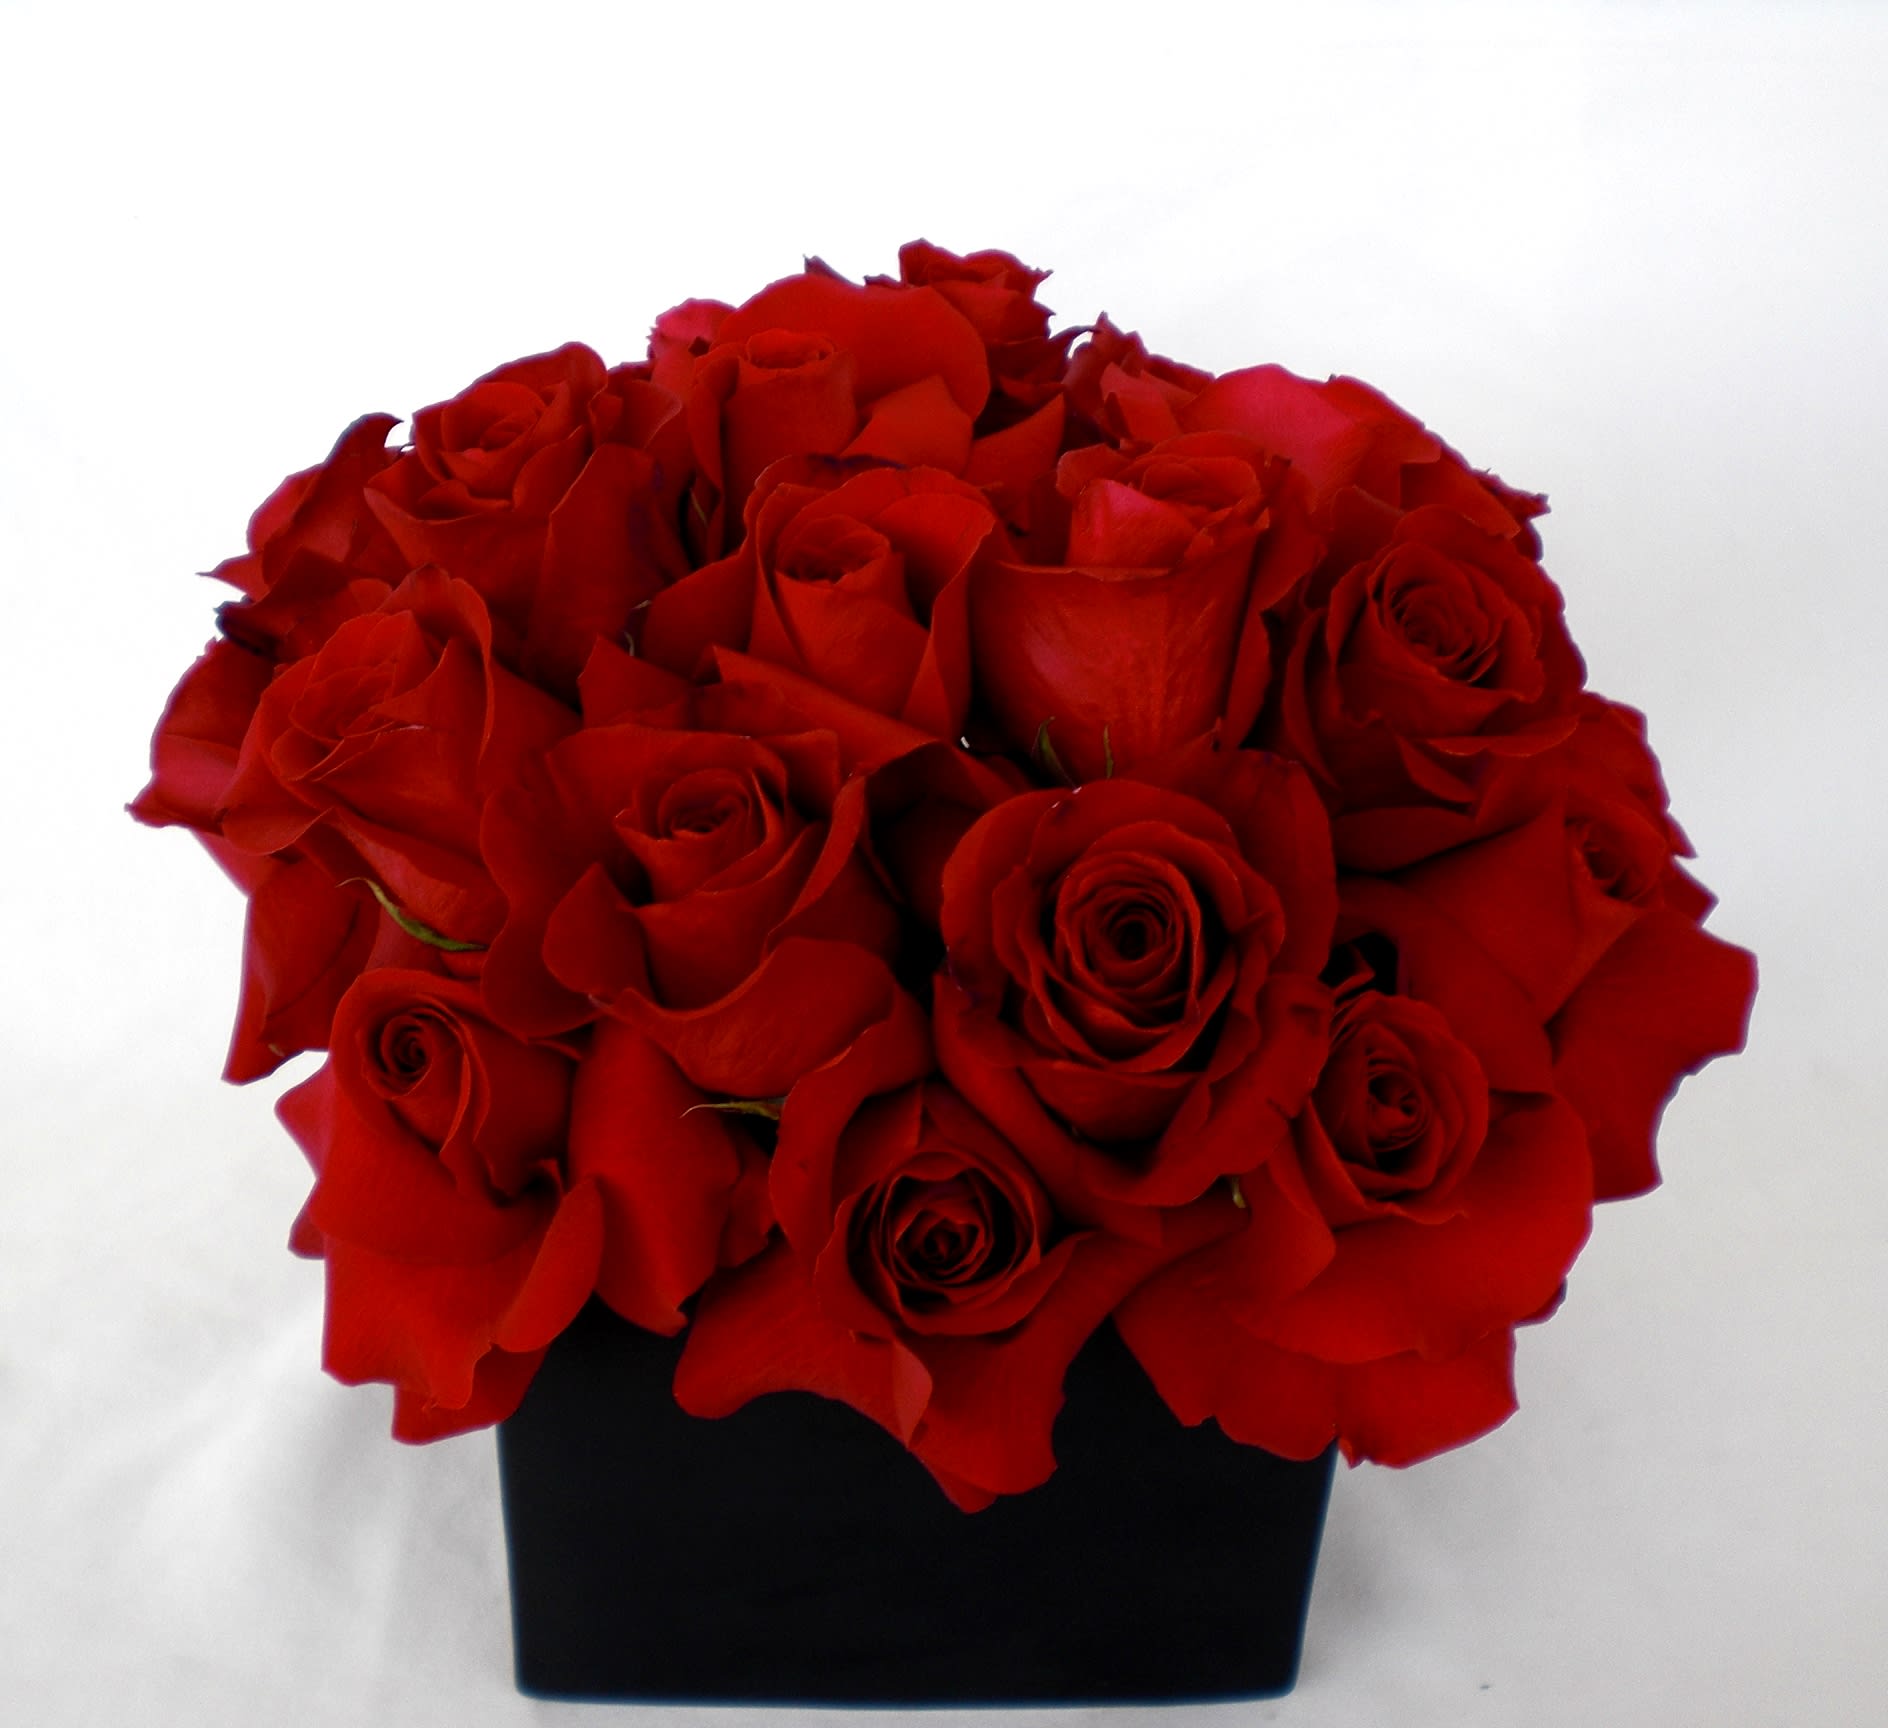 Passion Red Roses  - Immerse yourself in the timeless beauty of Dave's Flowers' exquisite arrangement featuring alluring red roses, elegantly presented in a sleek black cube container. This classic and sophisticated display is perfect for expressing love and admiration on any occasion.  As a local Los Angeles florist, we specialize in creating stunning floral designs that leave a lasting impression. Our all-red roses arrangement is a symbol of passion and romance, expertly arranged to add a touch of elegance to your space.  Explore the richness of our floral offerings at Dave's Flowers and make a statement with the vibrant hues of red roses. Ideal for birthdays, anniversaries, or moments that call for heartfelt expressions, our arrangements bring beauty and emotion to every occasion. Order now through our Flower Delivery in Los Angeles service to experience the unmatched quality and style of Dave's Flowers.